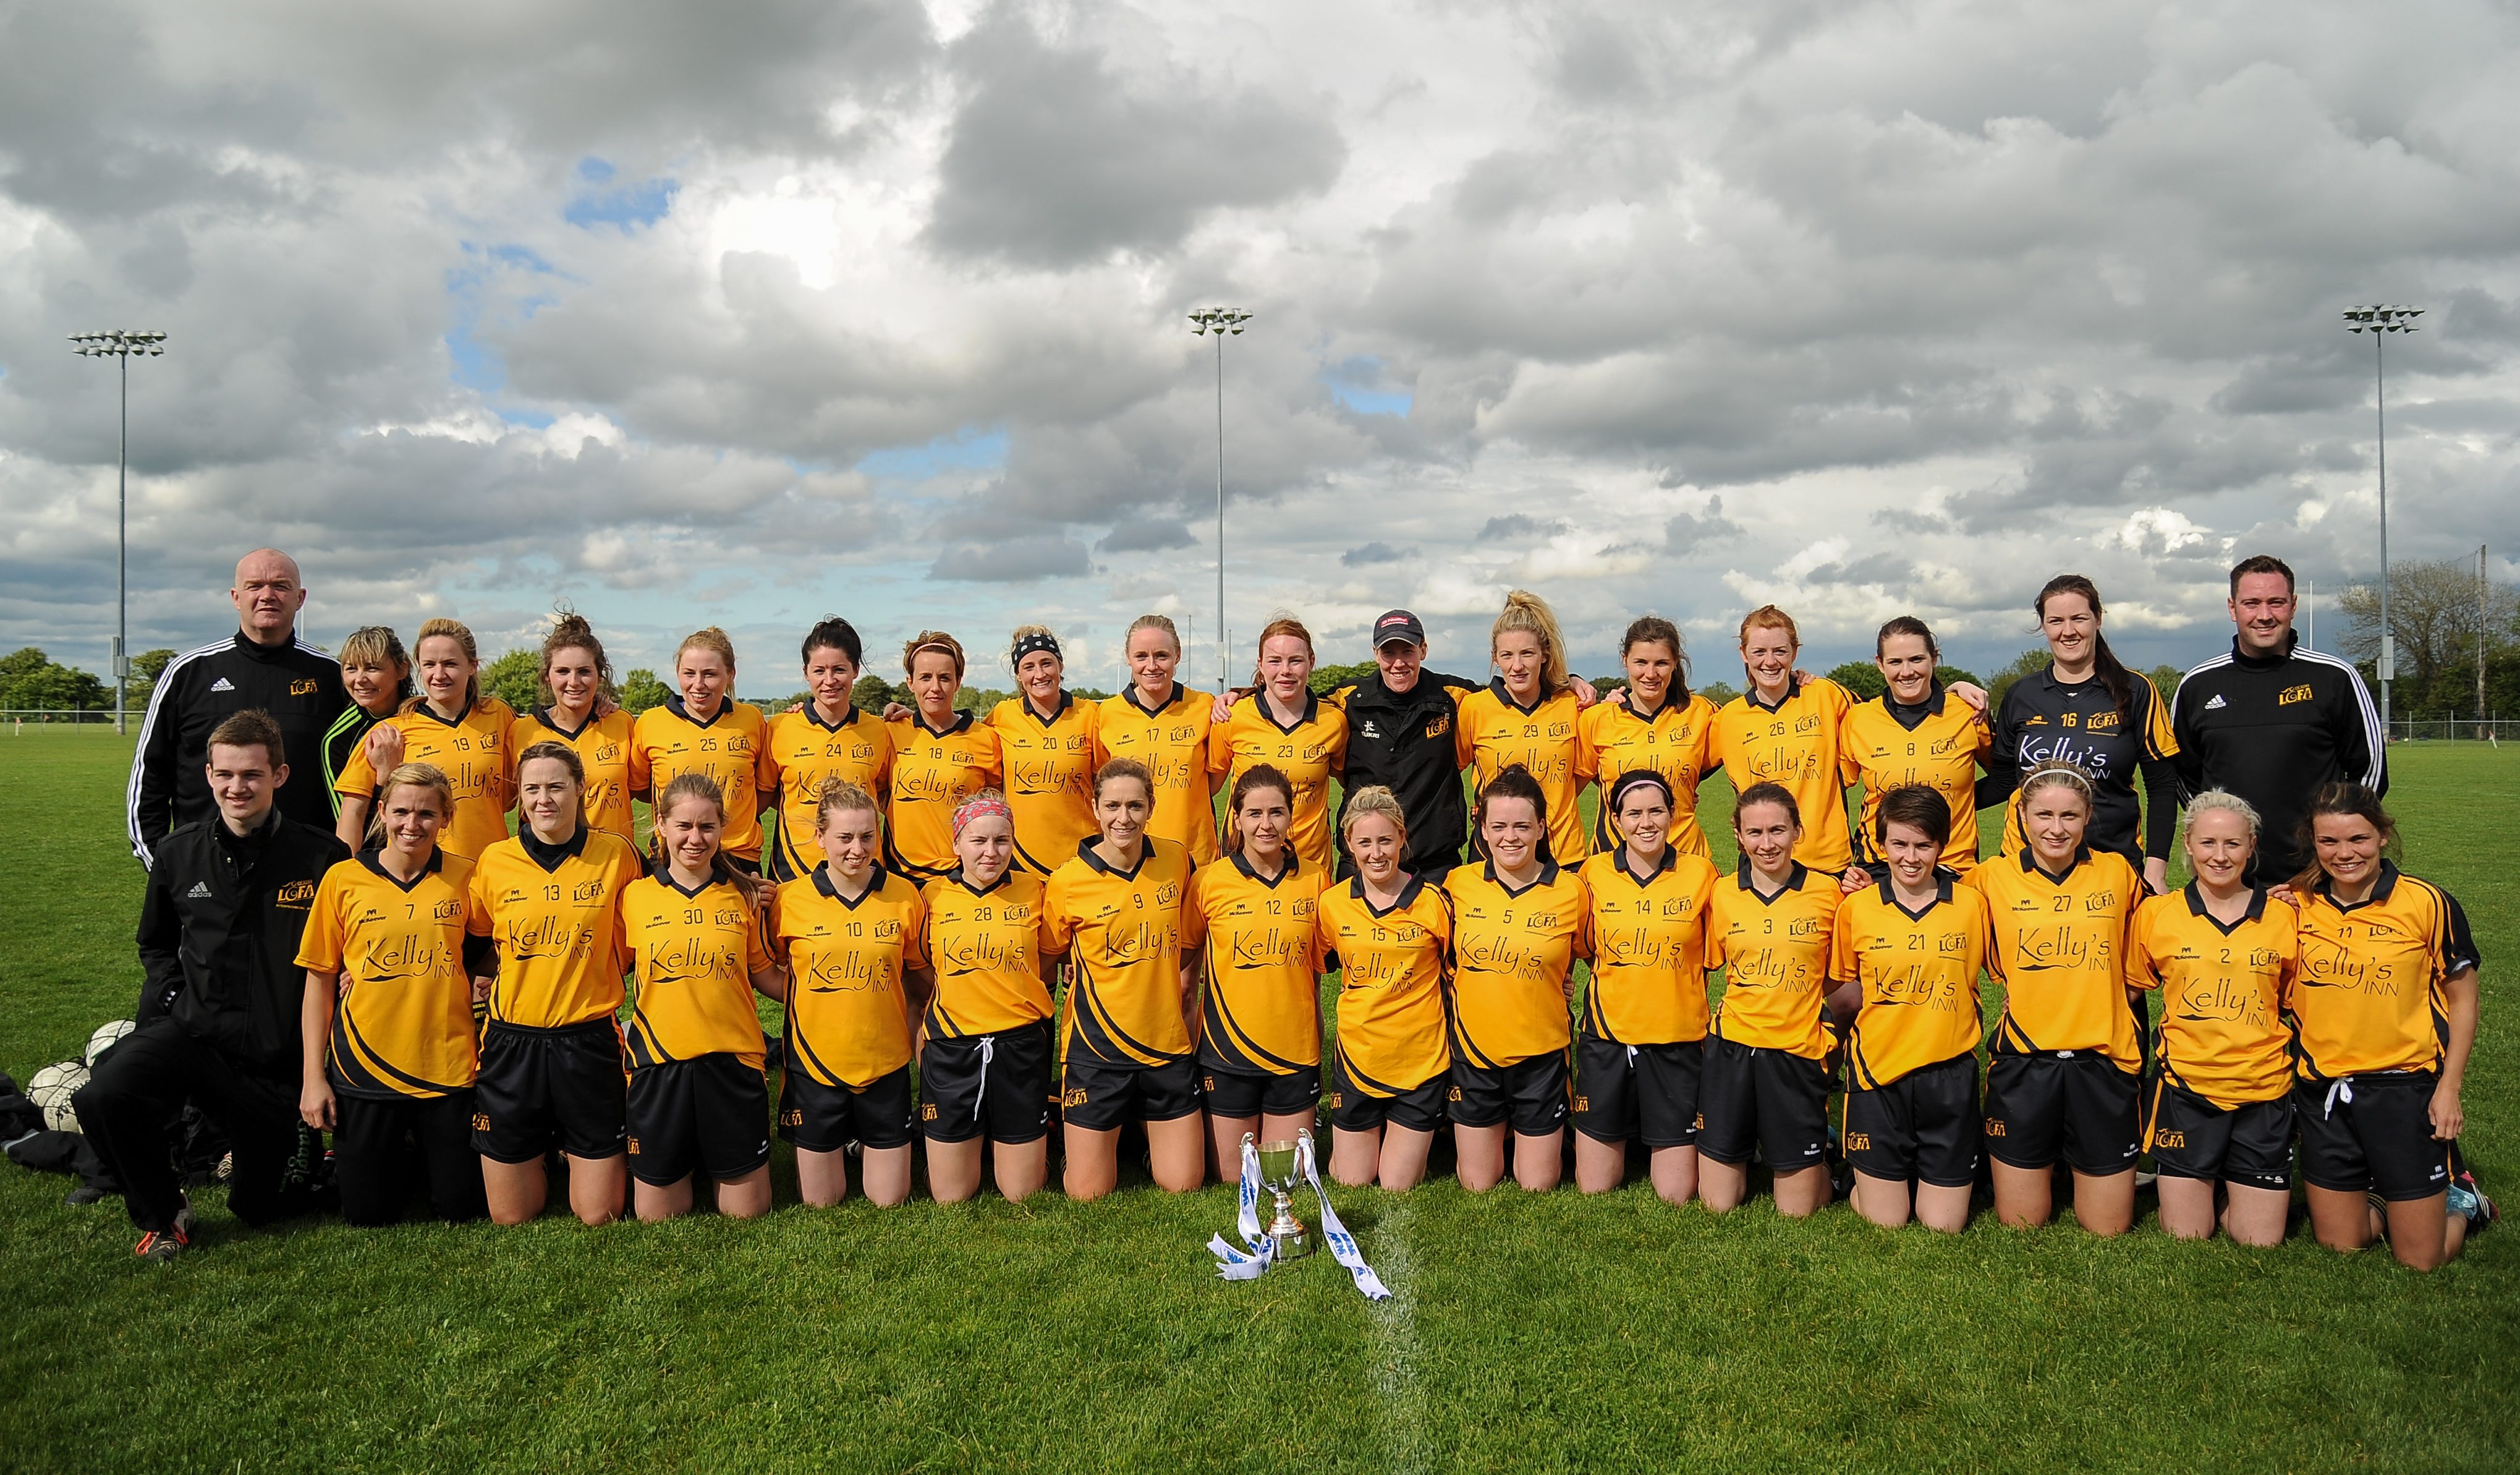 21 May 2016; The Ulster team with the cup following the MMI Ladies Football Interprovincial Football Cup Final, Ulster v Connacht, in Kinnegad, Co. Westmeath. Photo by Sam Barnes/Sportsfile *** NO REPRODUCTION FEE ***